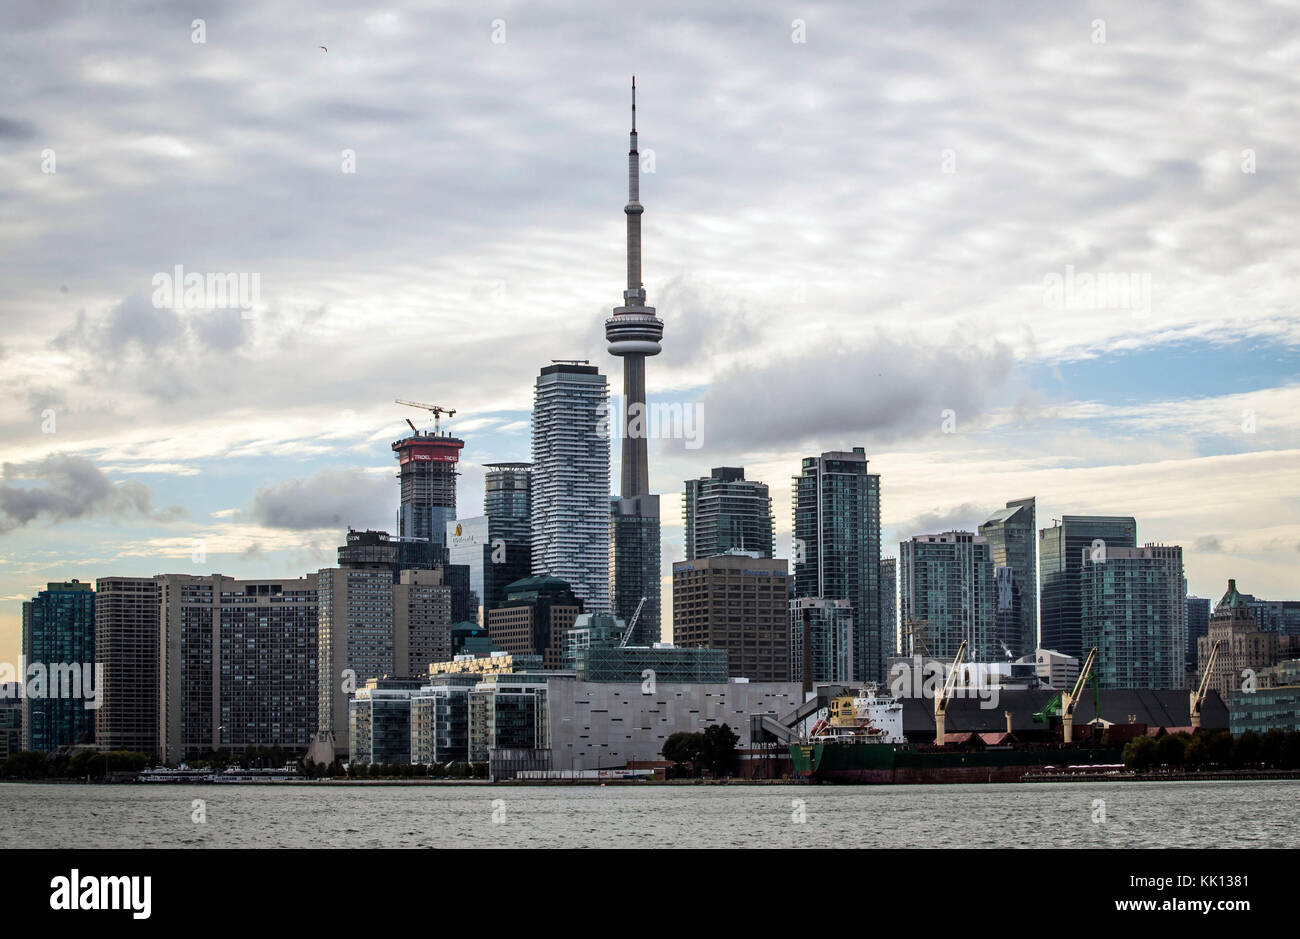 A general view of the Toronto skyline in Canada, including the CN Tower. Prince Harry and Meghan Markle have announced their engagement. Stock Photo